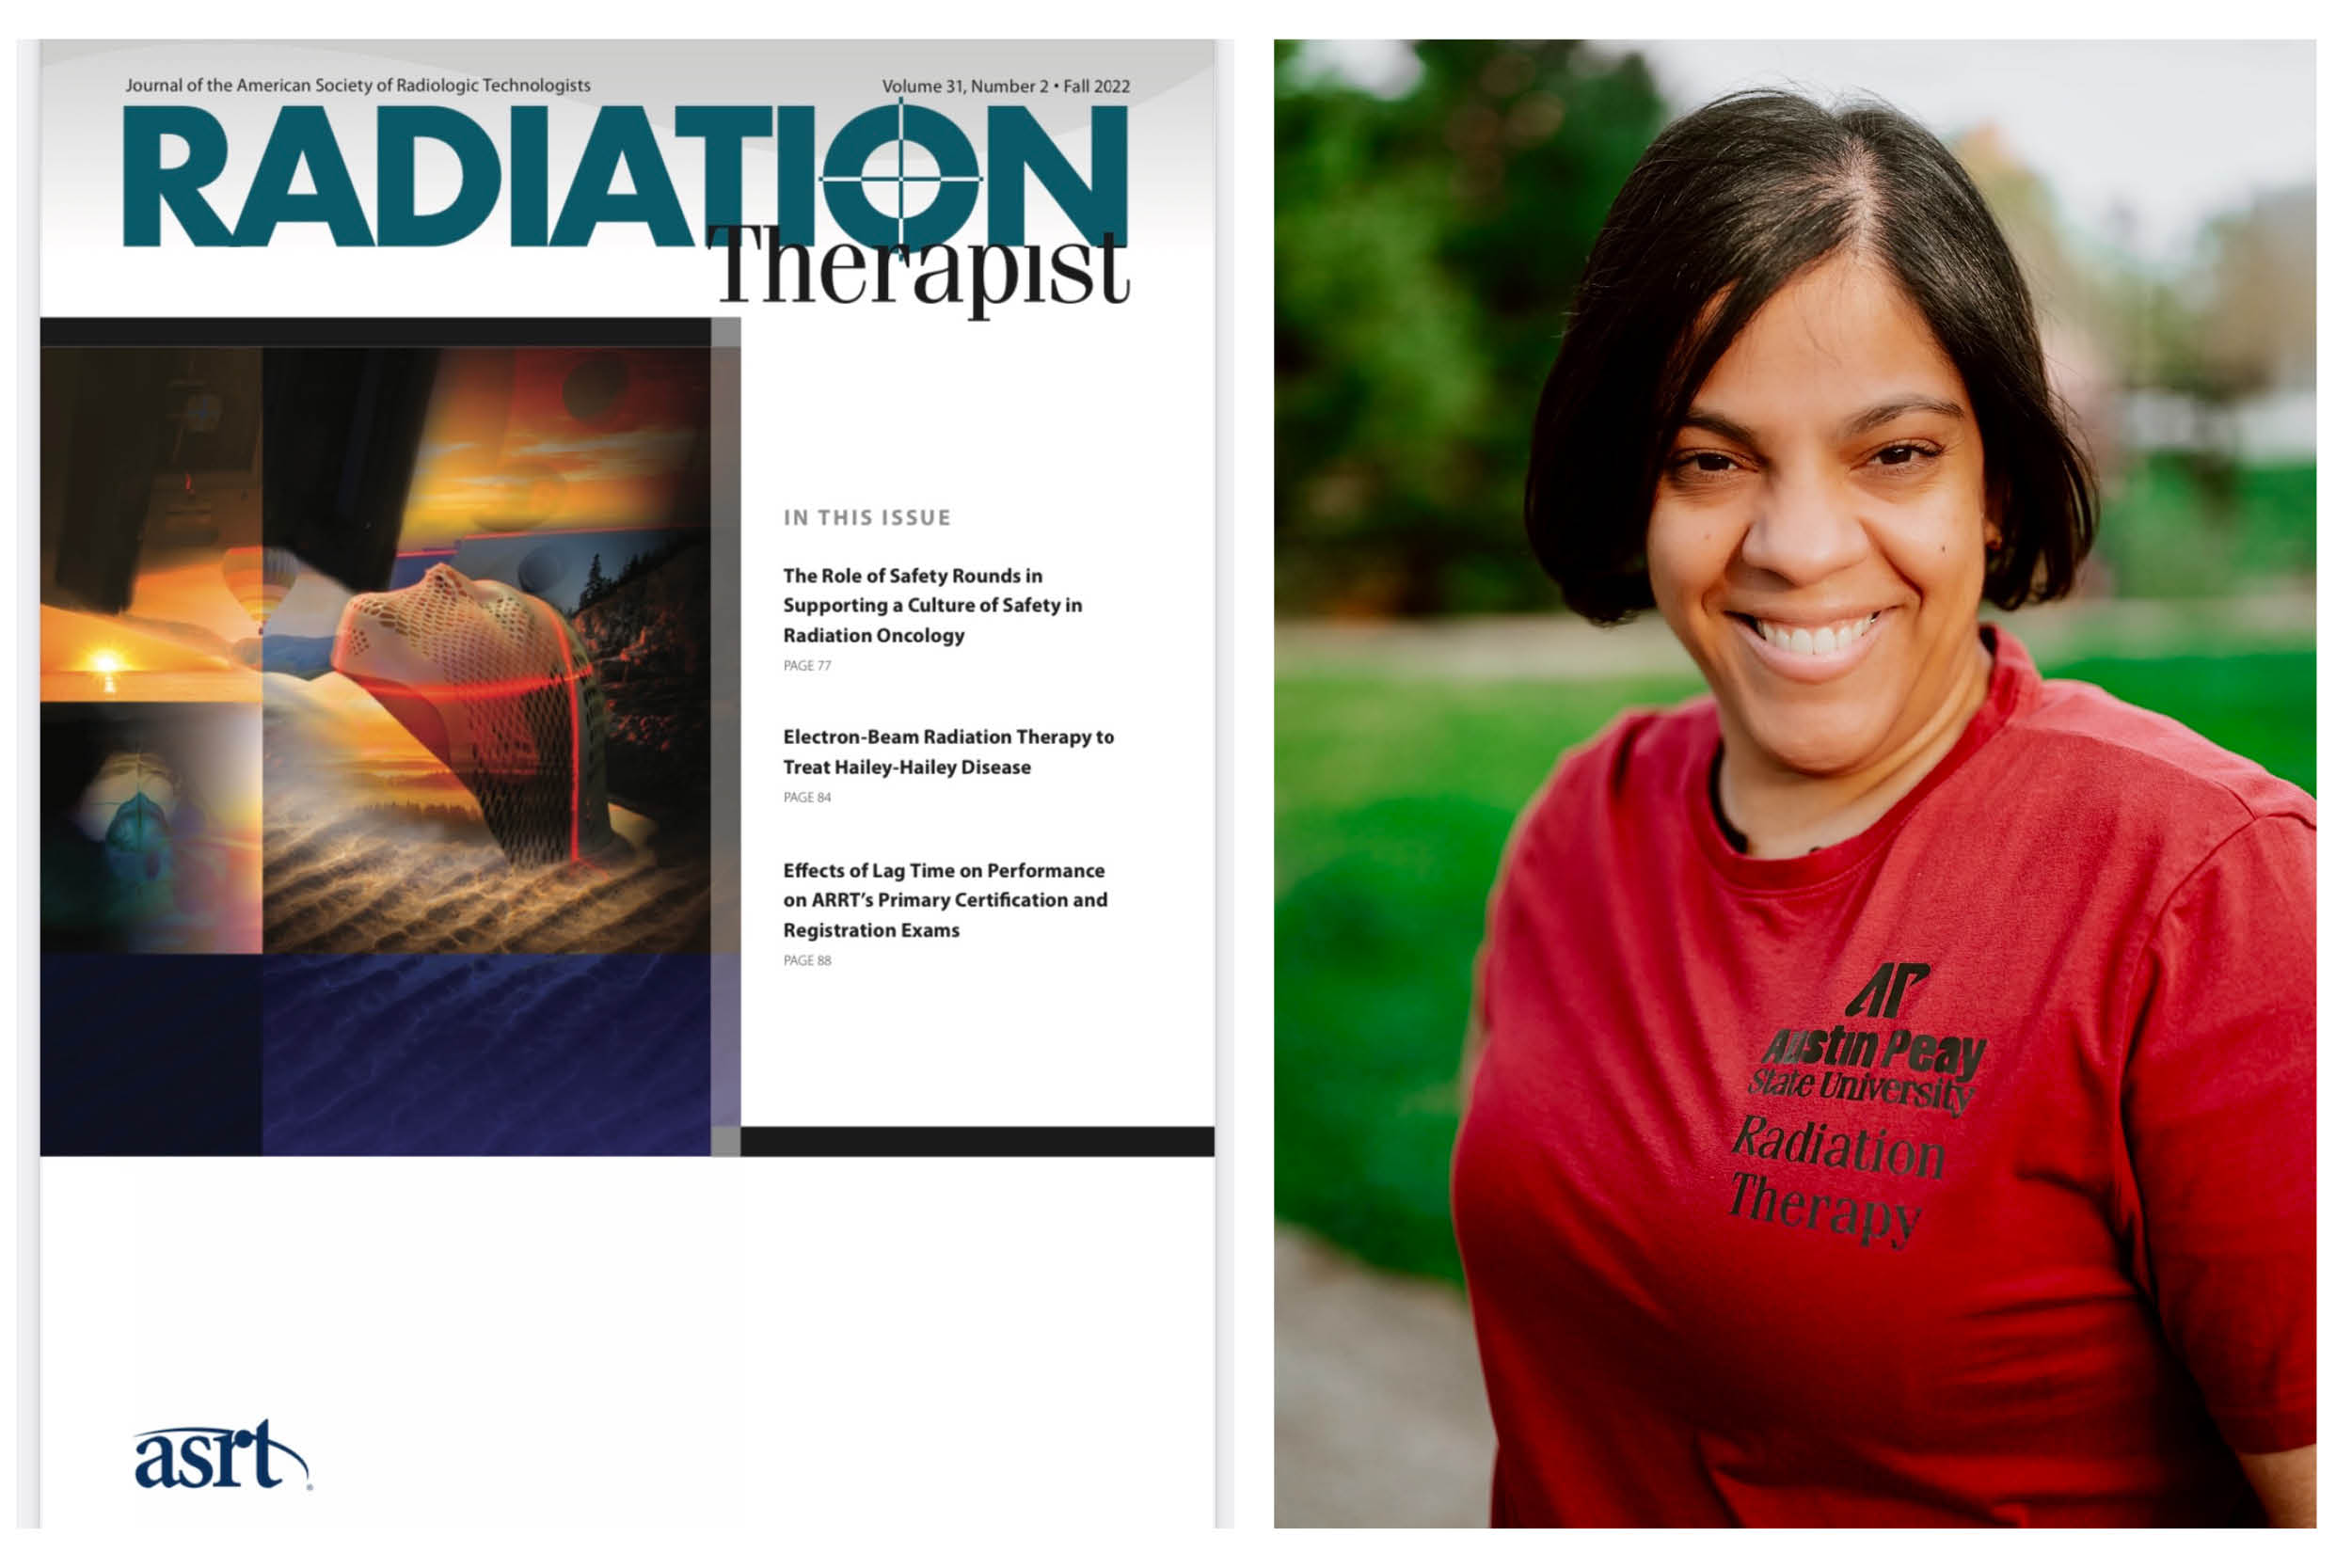 Austin Peay radiation therapy graduate publishes case study in national journal